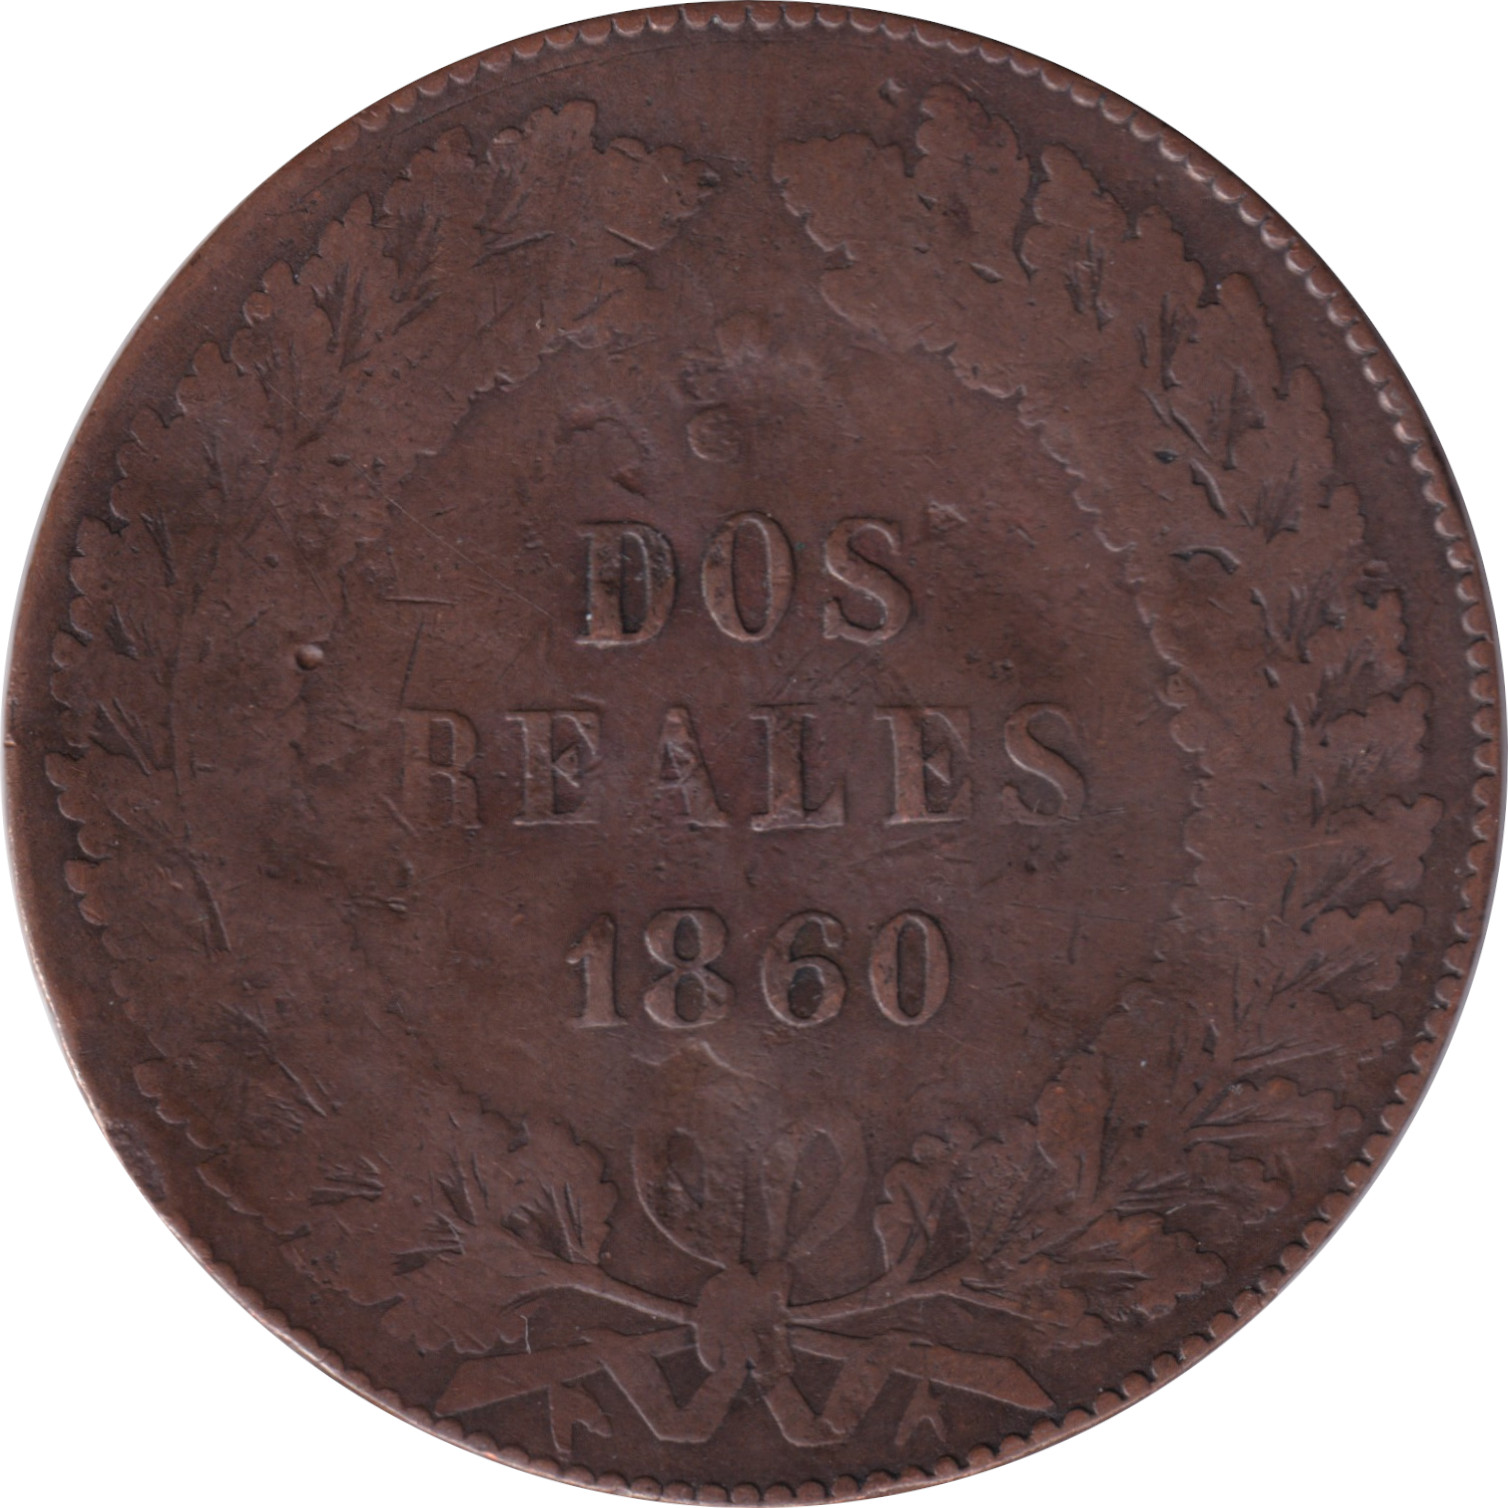 2 reales - Buenos Aires - 2Rs